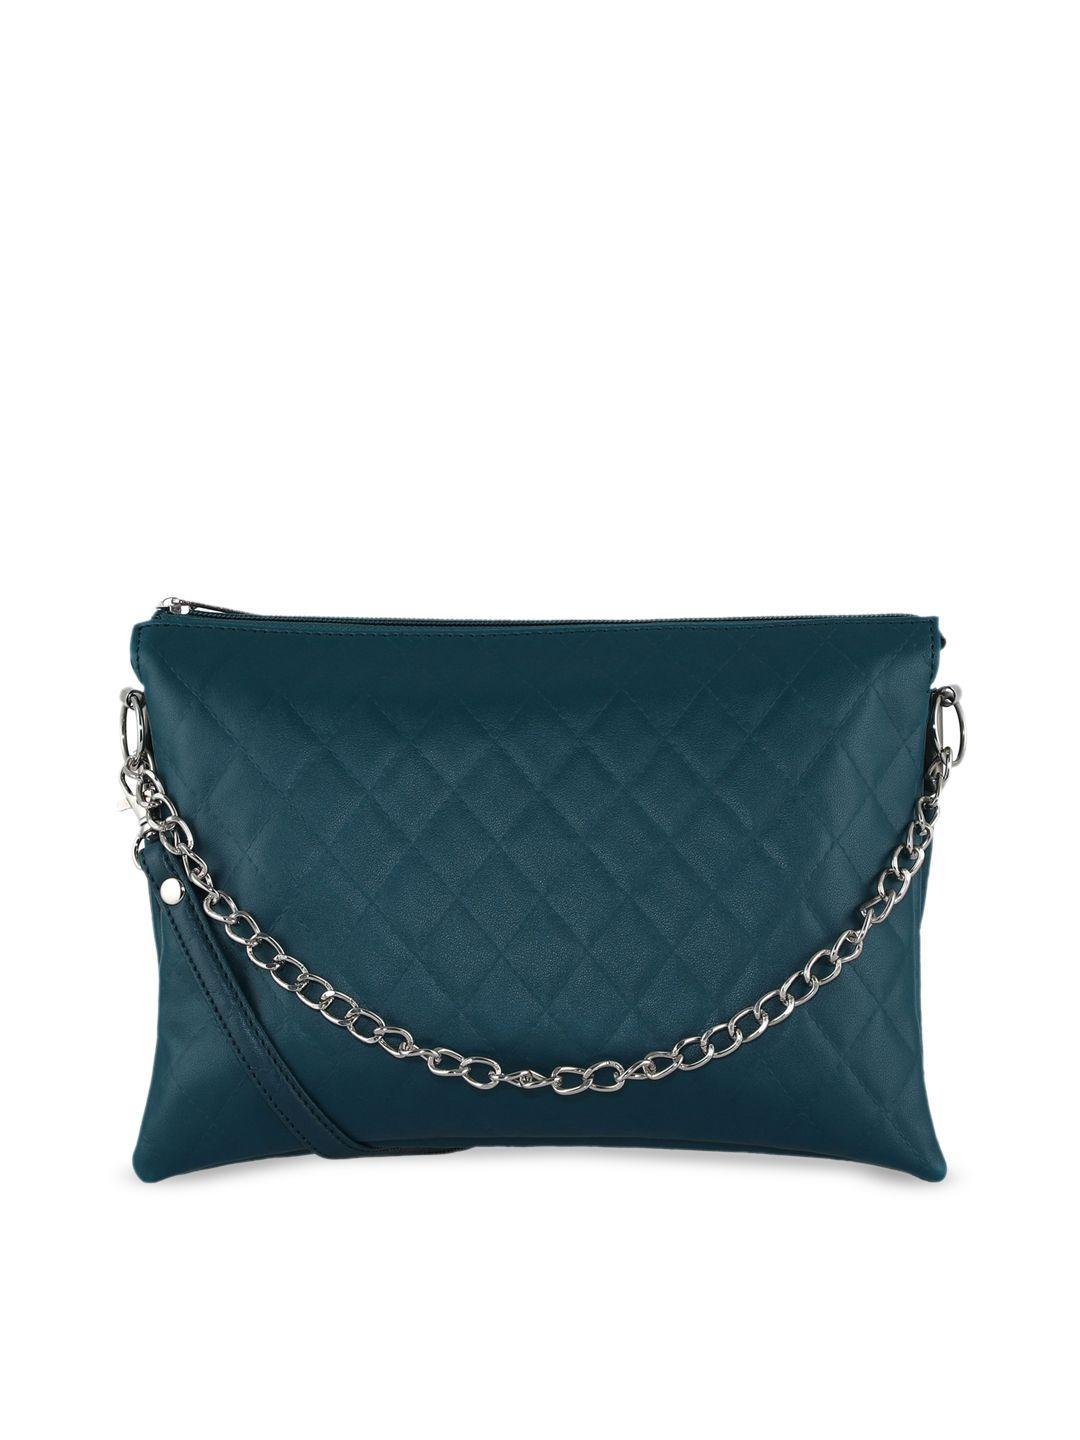 toteteca women teal textured pu structured quilted sling bag